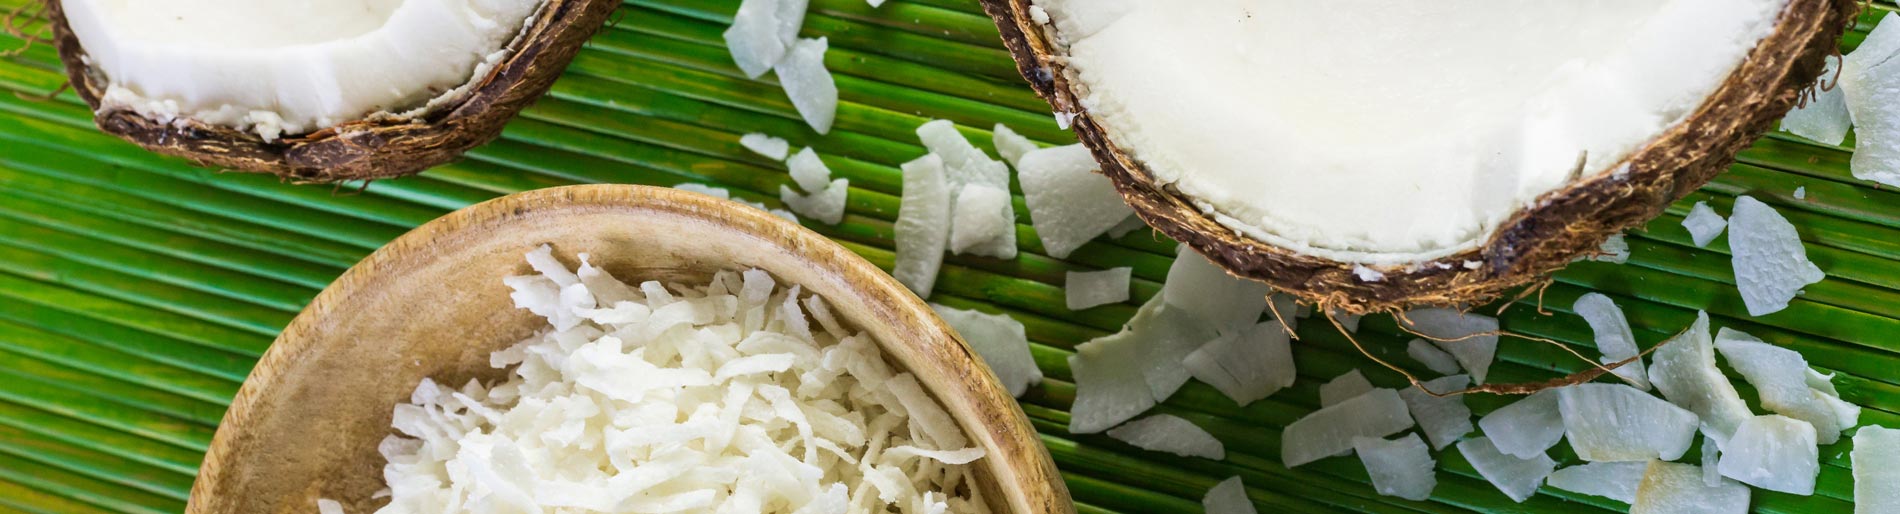 Organic Desiccated Coconut – More than Just a Garnish